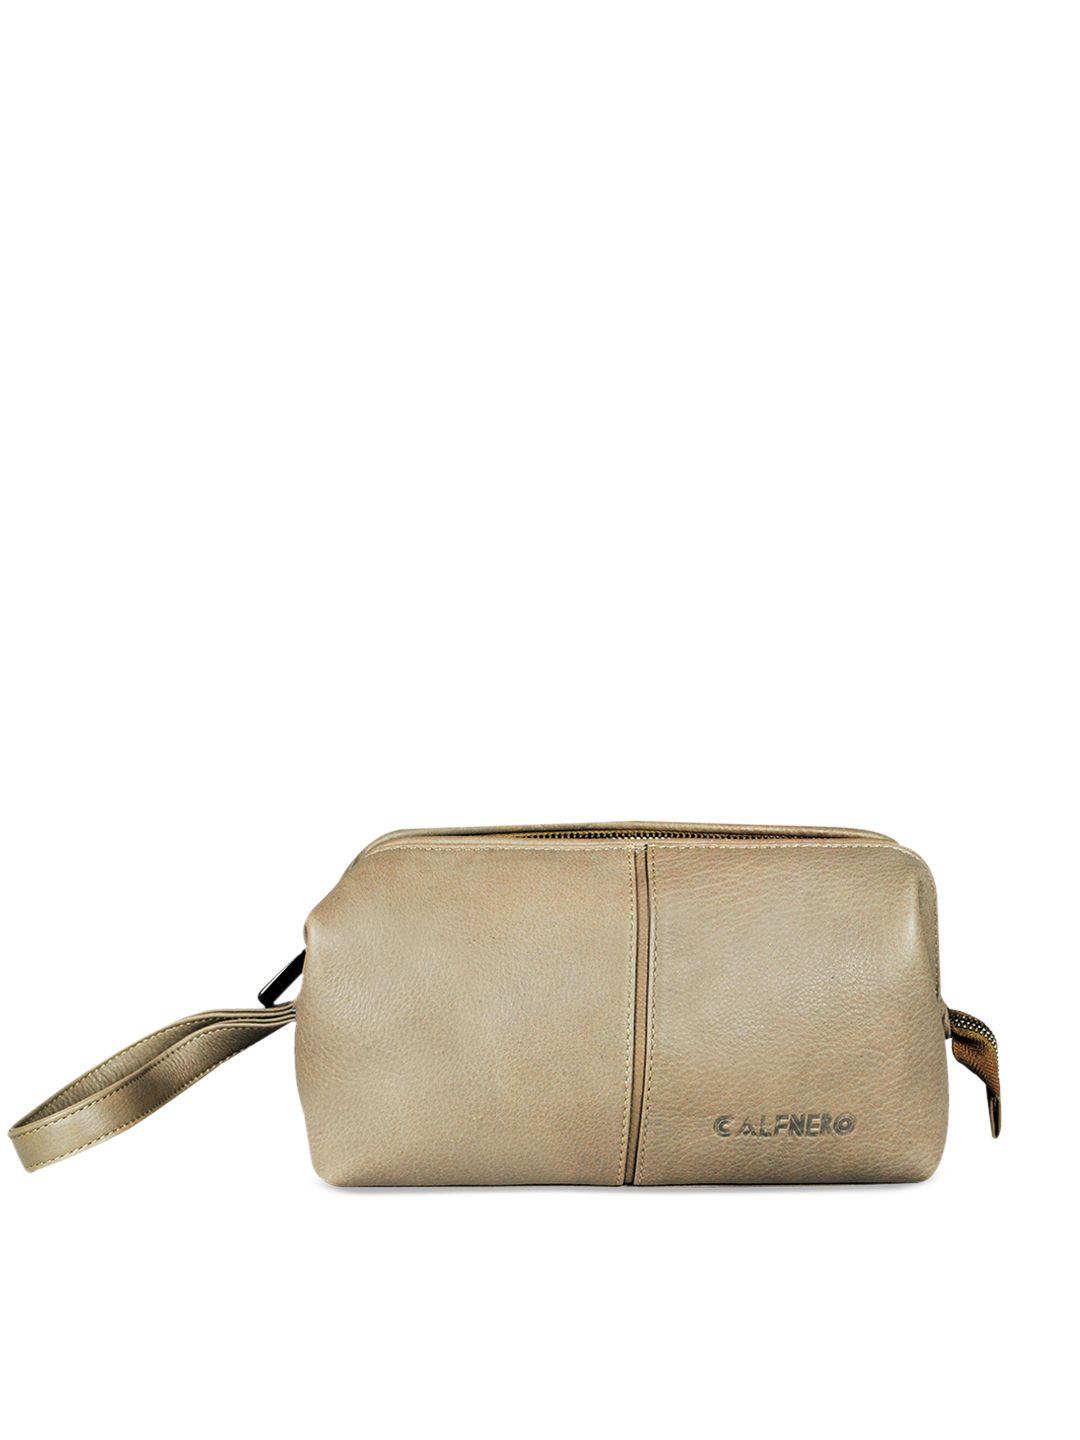 calfnero taupe-cream colored solid leather toiletry bag